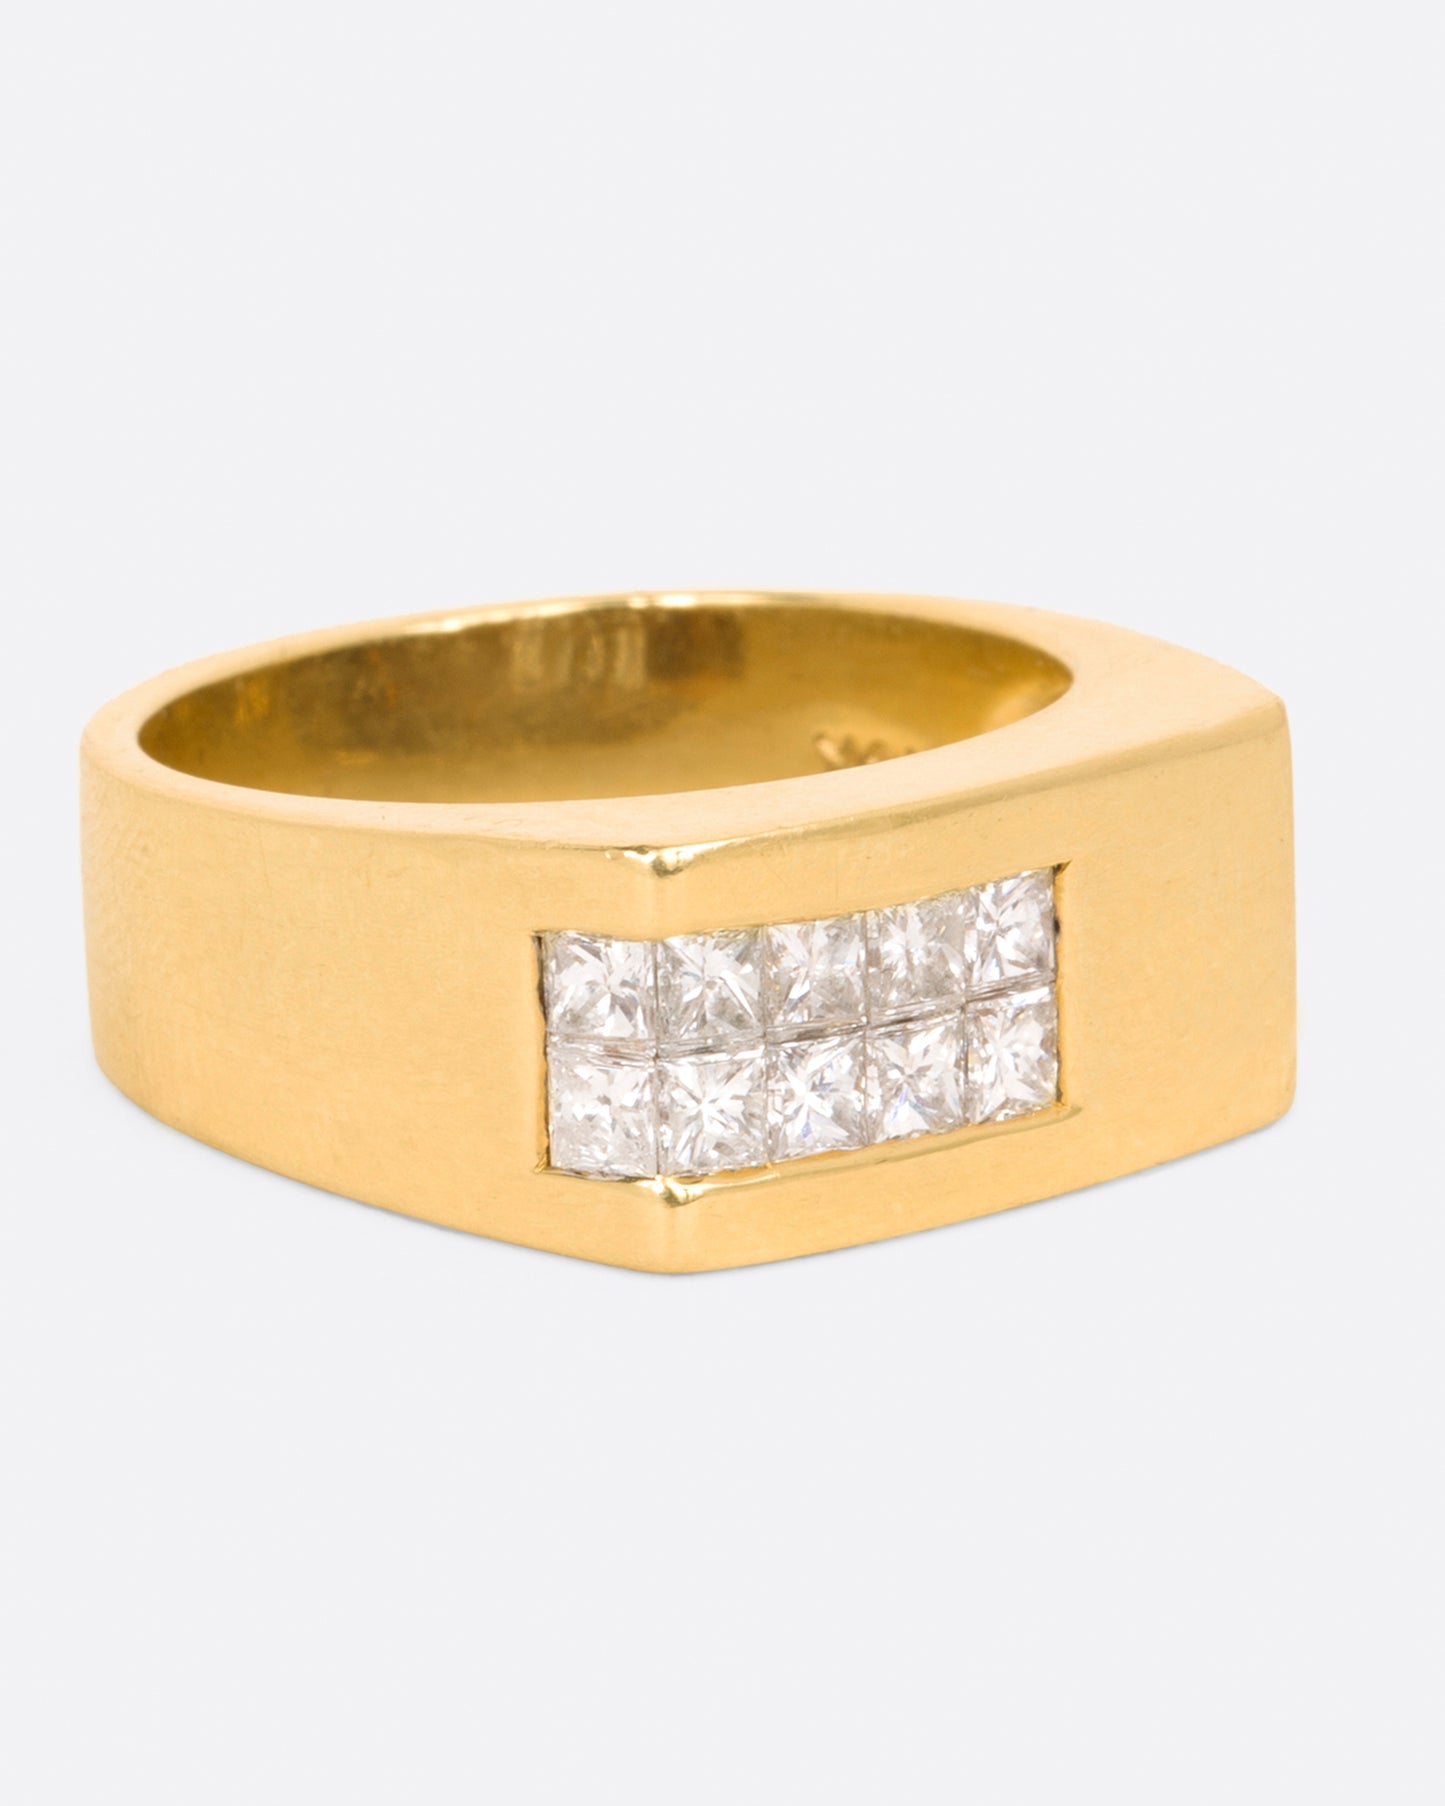 A yellow gold rectangular signet ring with 10 princess cut diamonds on one corner, shown from the side.